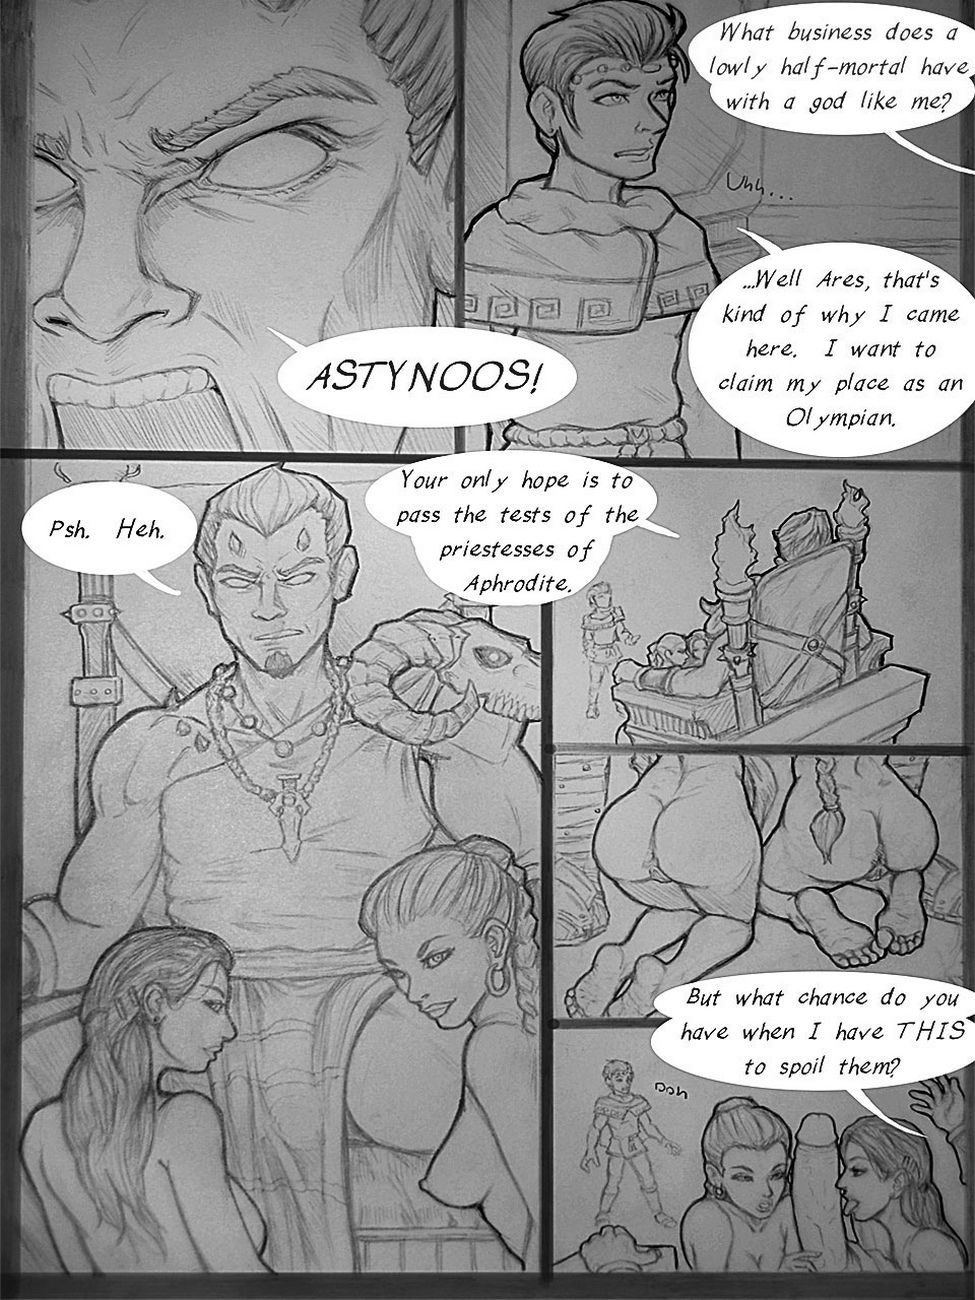 Astynoos And The 4 Priestesses Of Aphrodite page 2